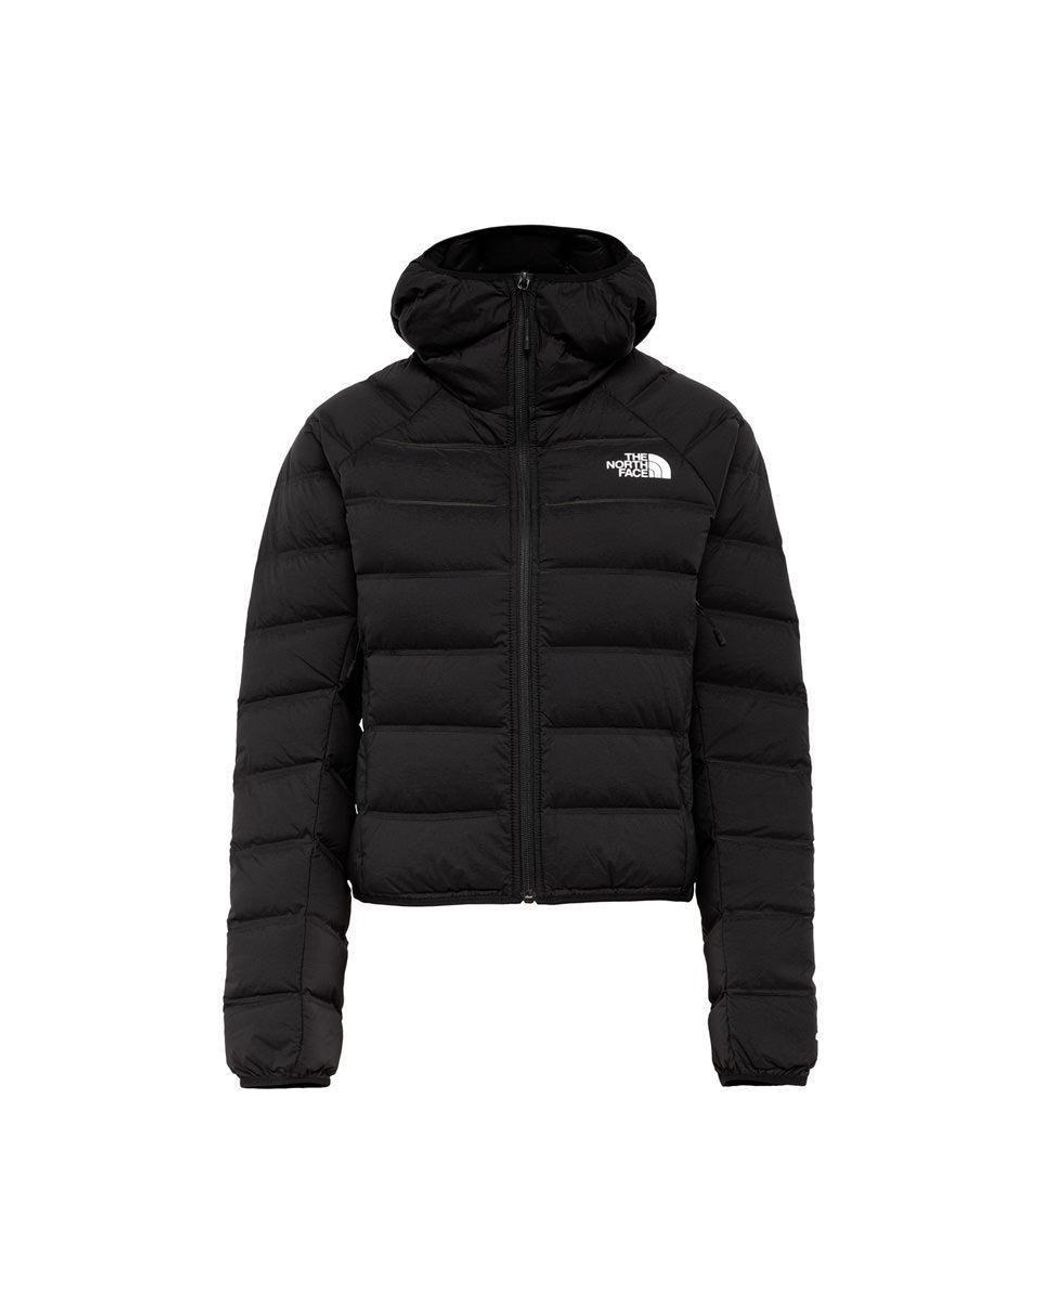 The North Face Rmst Down Hoodie Puffer Jacket Nf0a7uqfjk31 in Black | Lyst